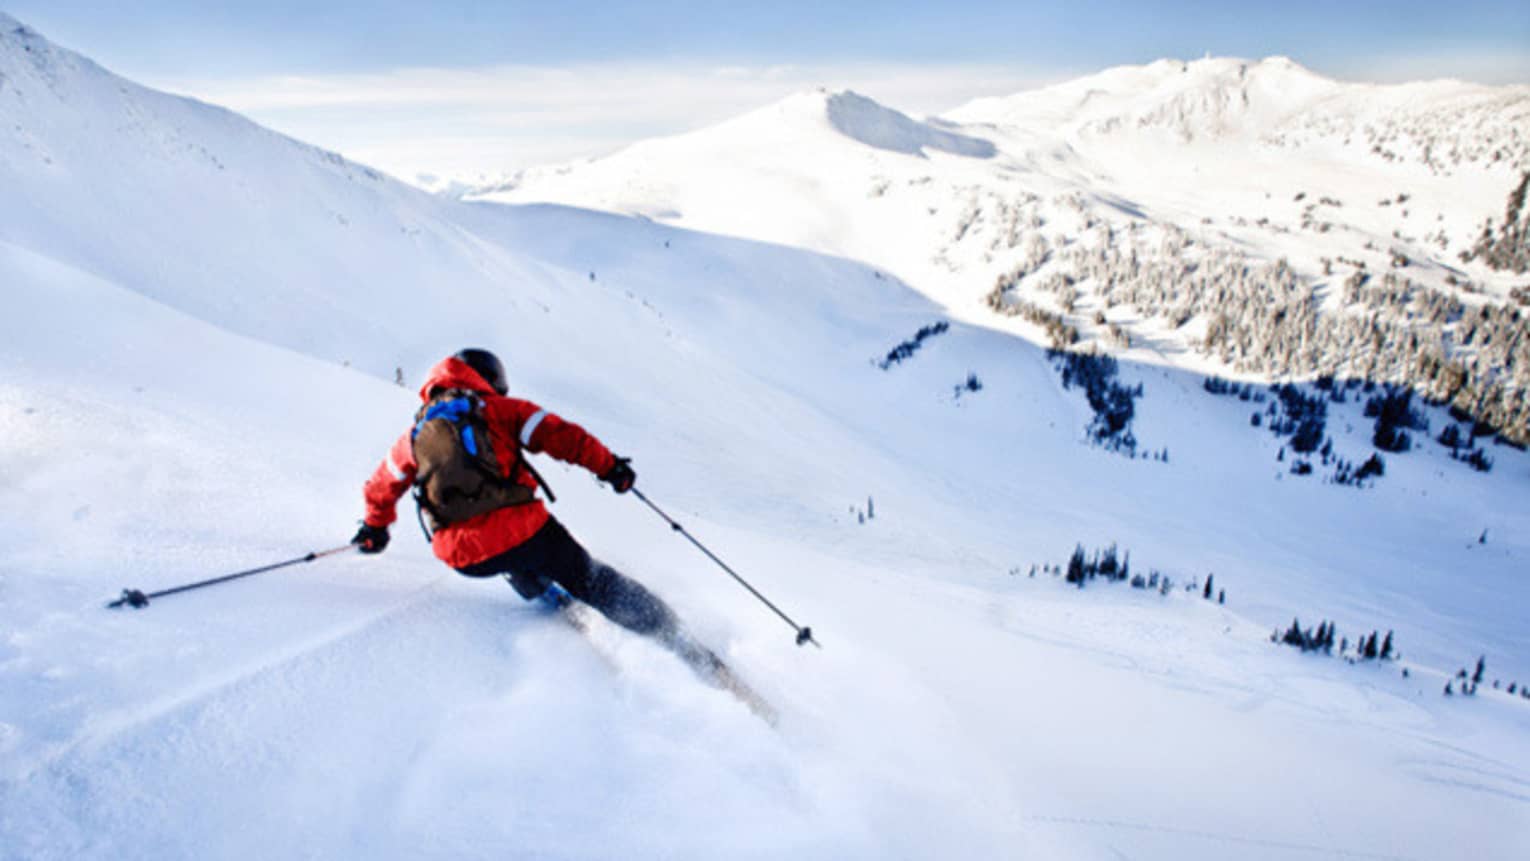 Back view of skier in red jacket, backpack, skiing down mountain slope on sunny day